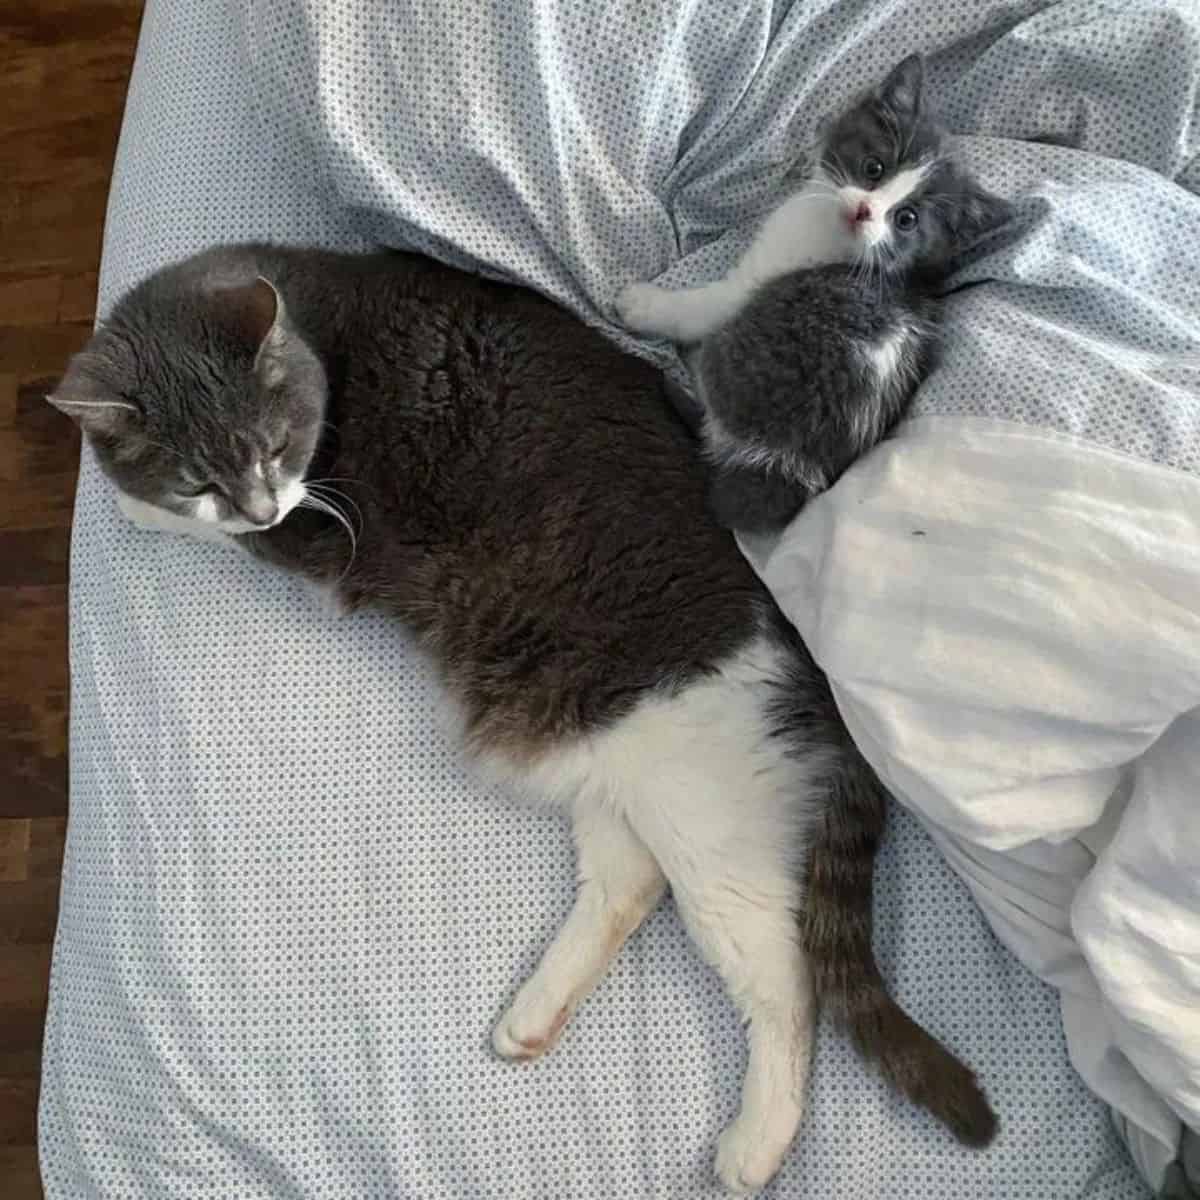 photo of Nannah lying in bed with an other cat